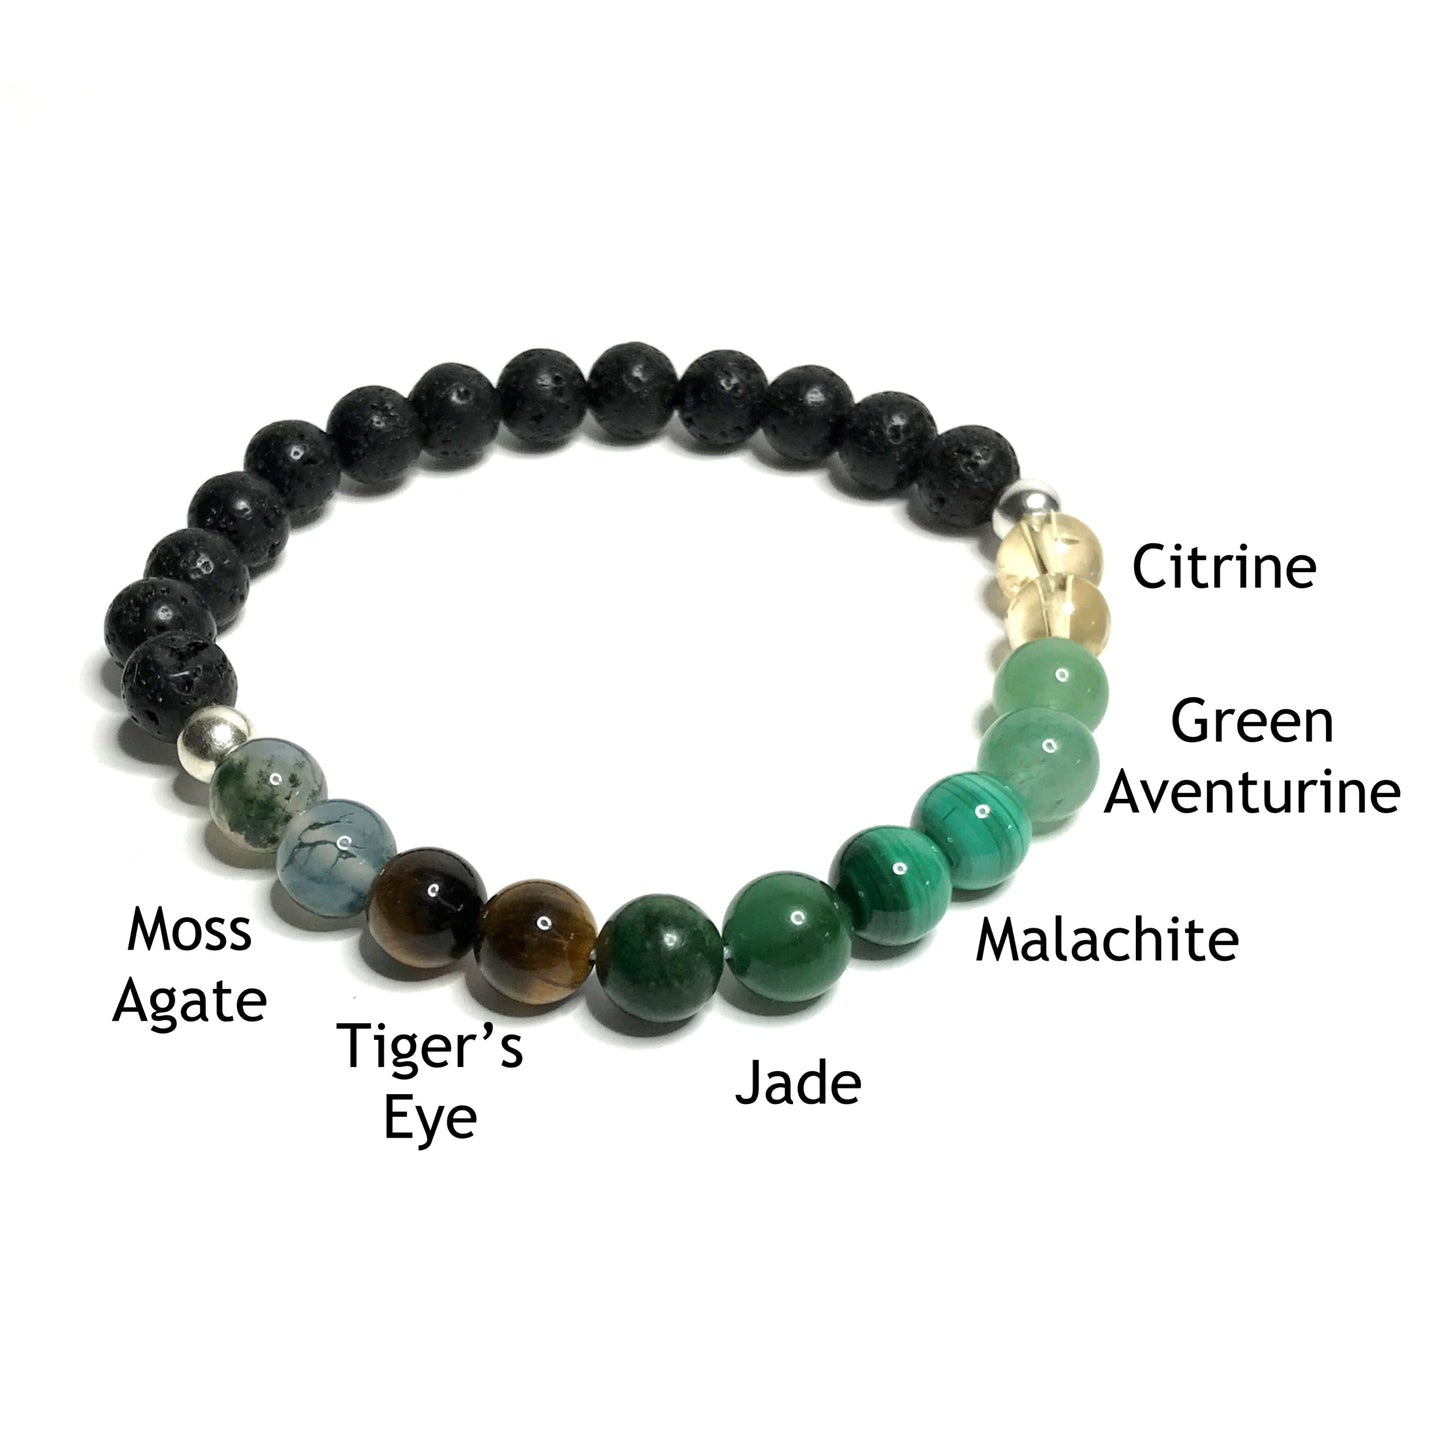 Abundance bracelet with lava rock with the beads labelled as moss agate, tiger's eye, jade, malachite, green aventurine and citrine